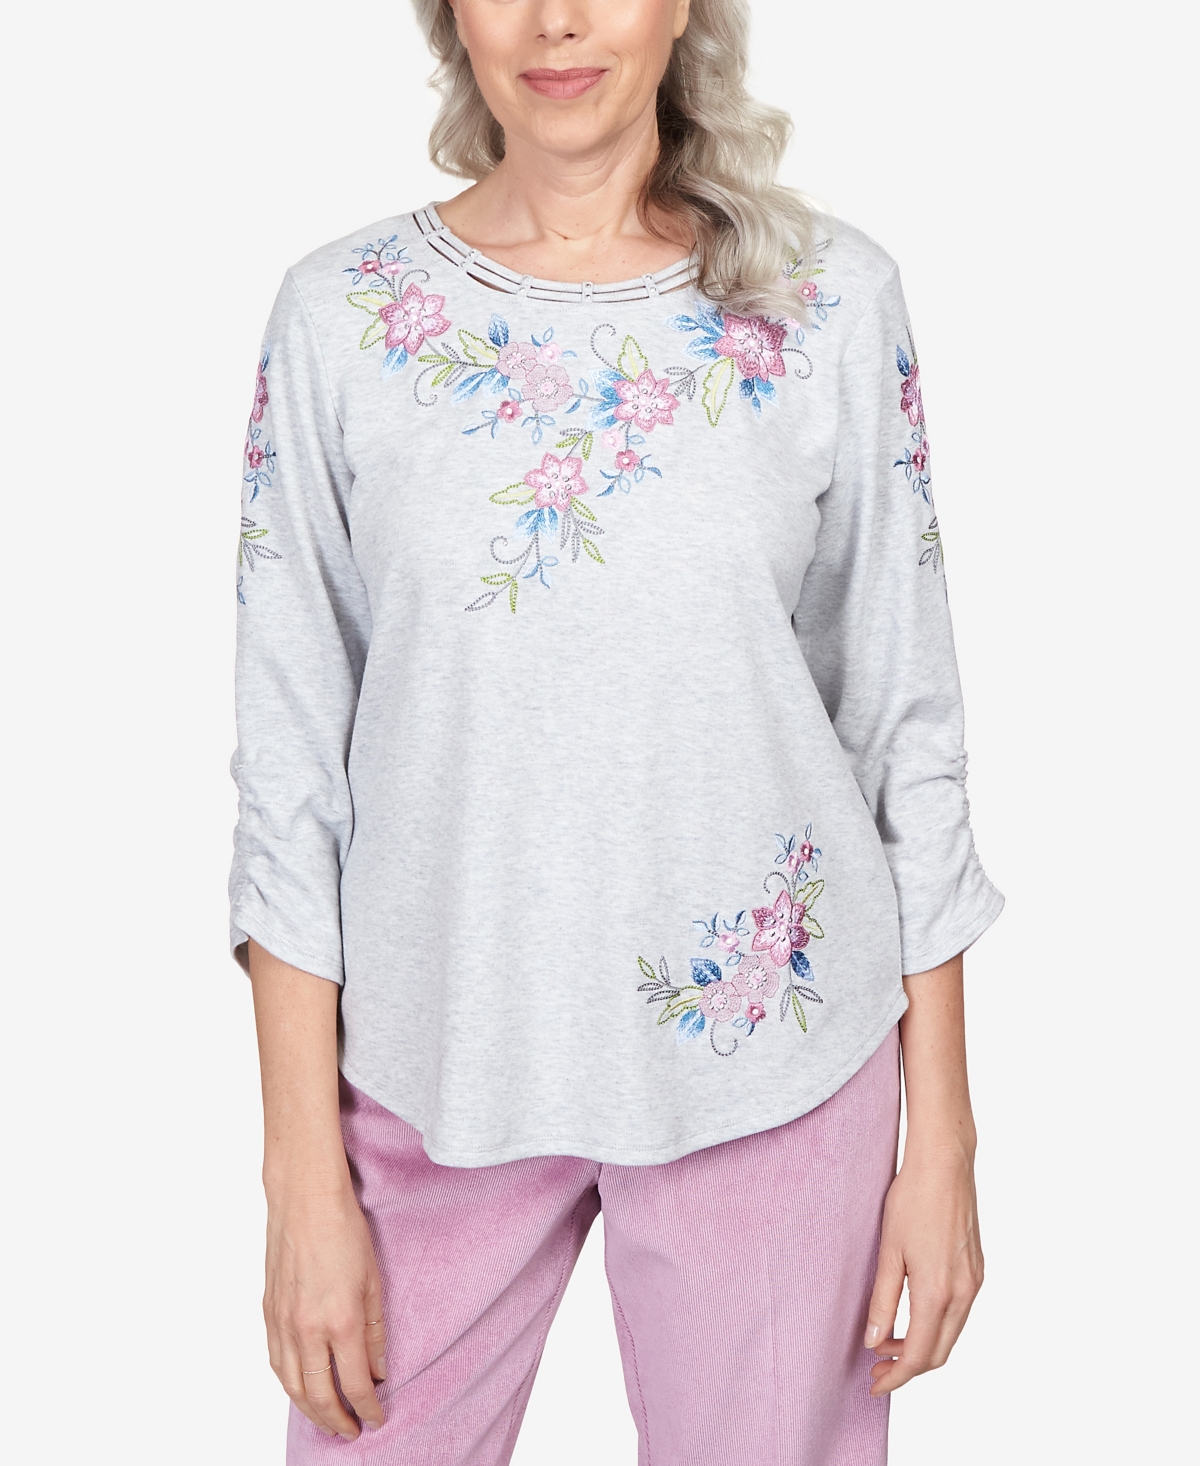 ALFRED DUNNER WOMEN'S SWISS CHALET FLORAL YOKE EMBROIDERED DOUBLE STRAP TOP